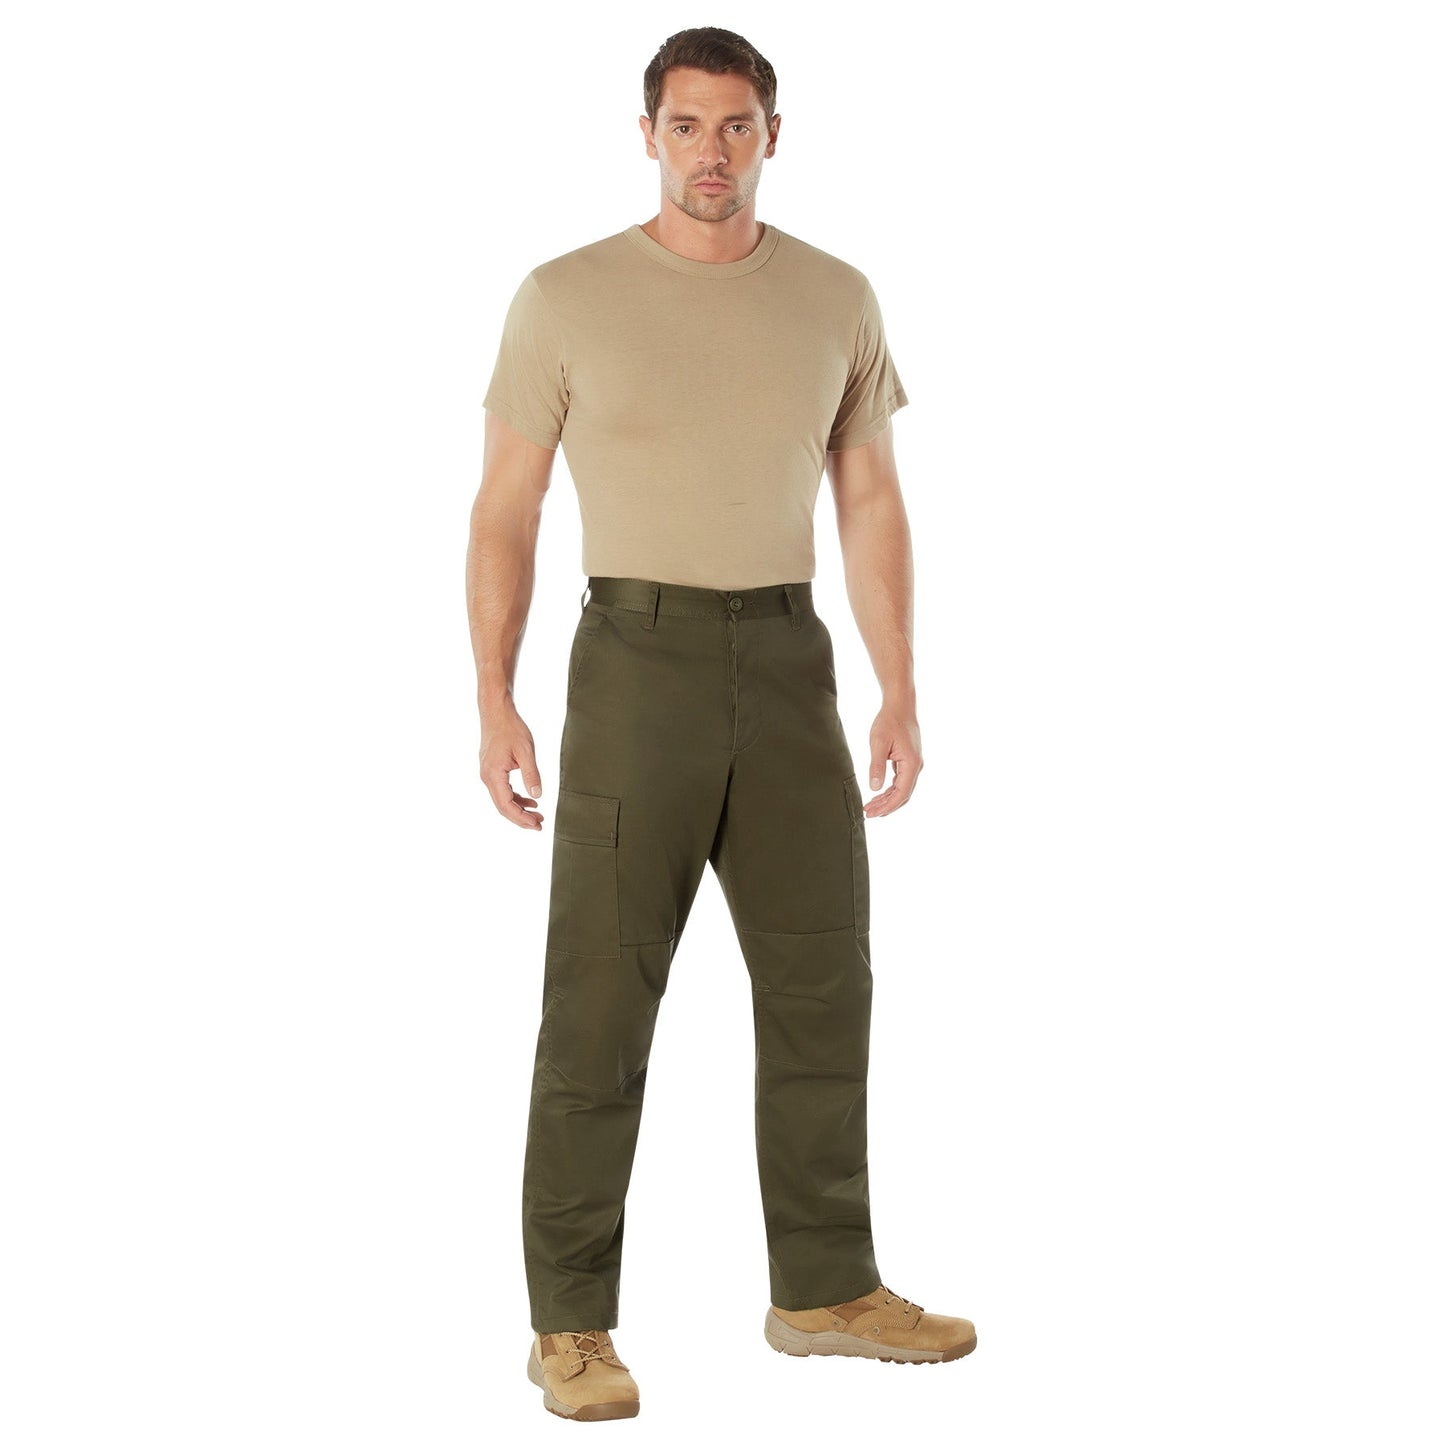 Rothco Unisex Tactical BDU Cargo Pants